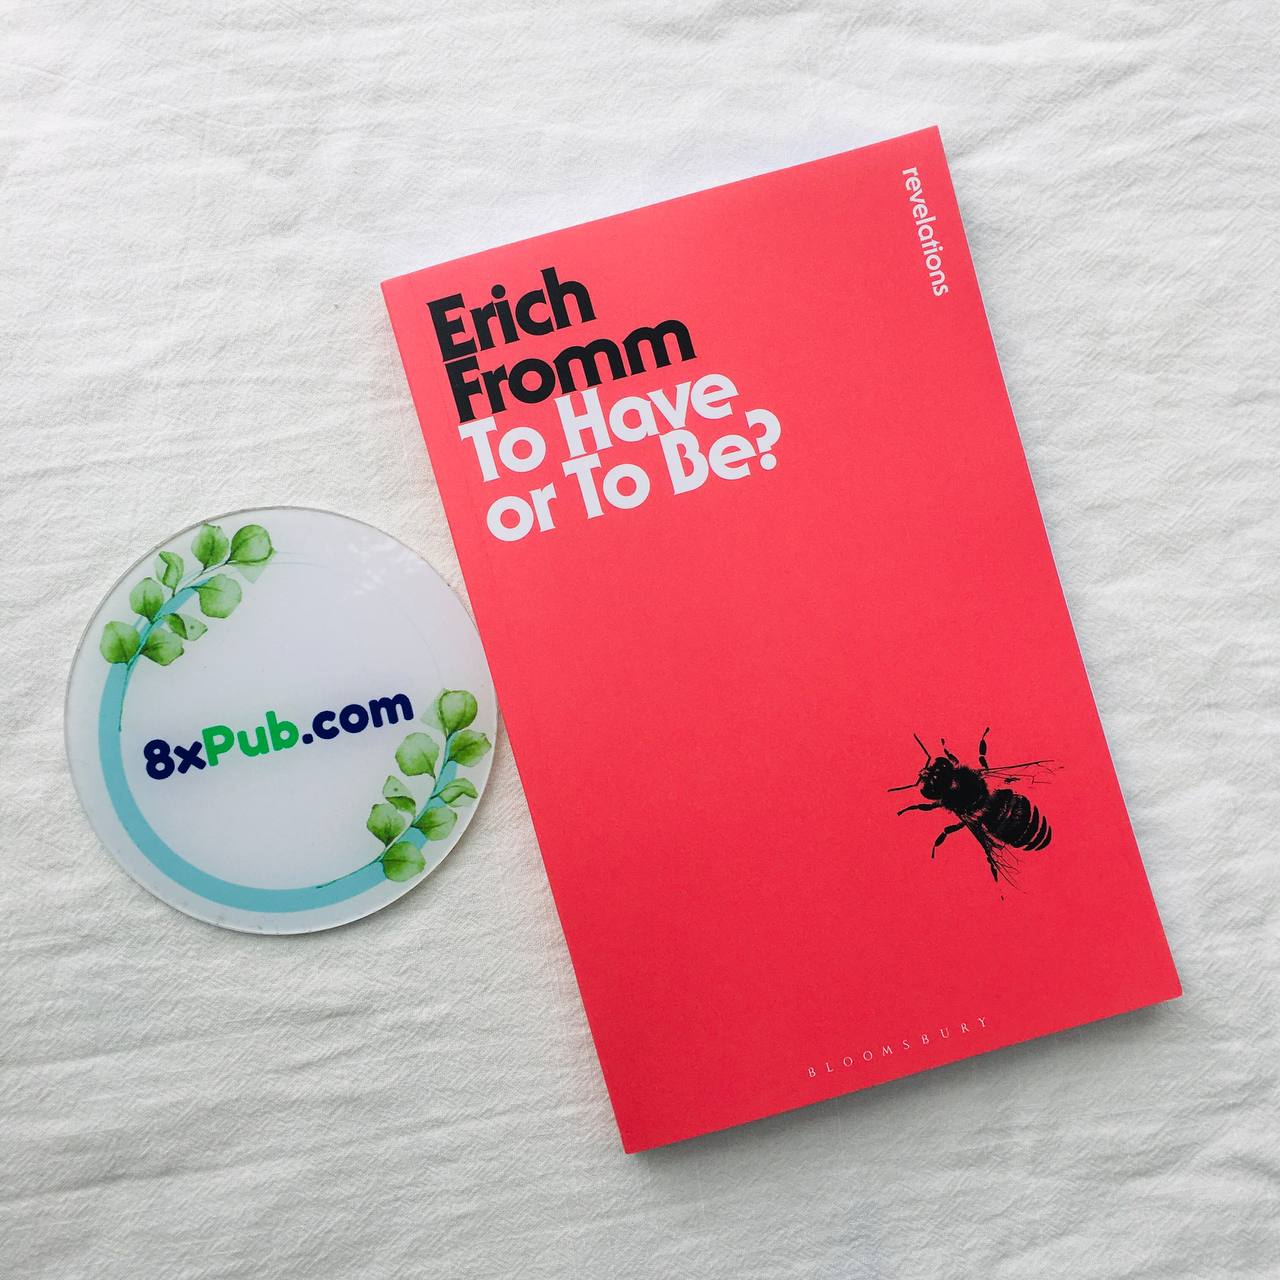 To Have or To Be by Erich Fromm